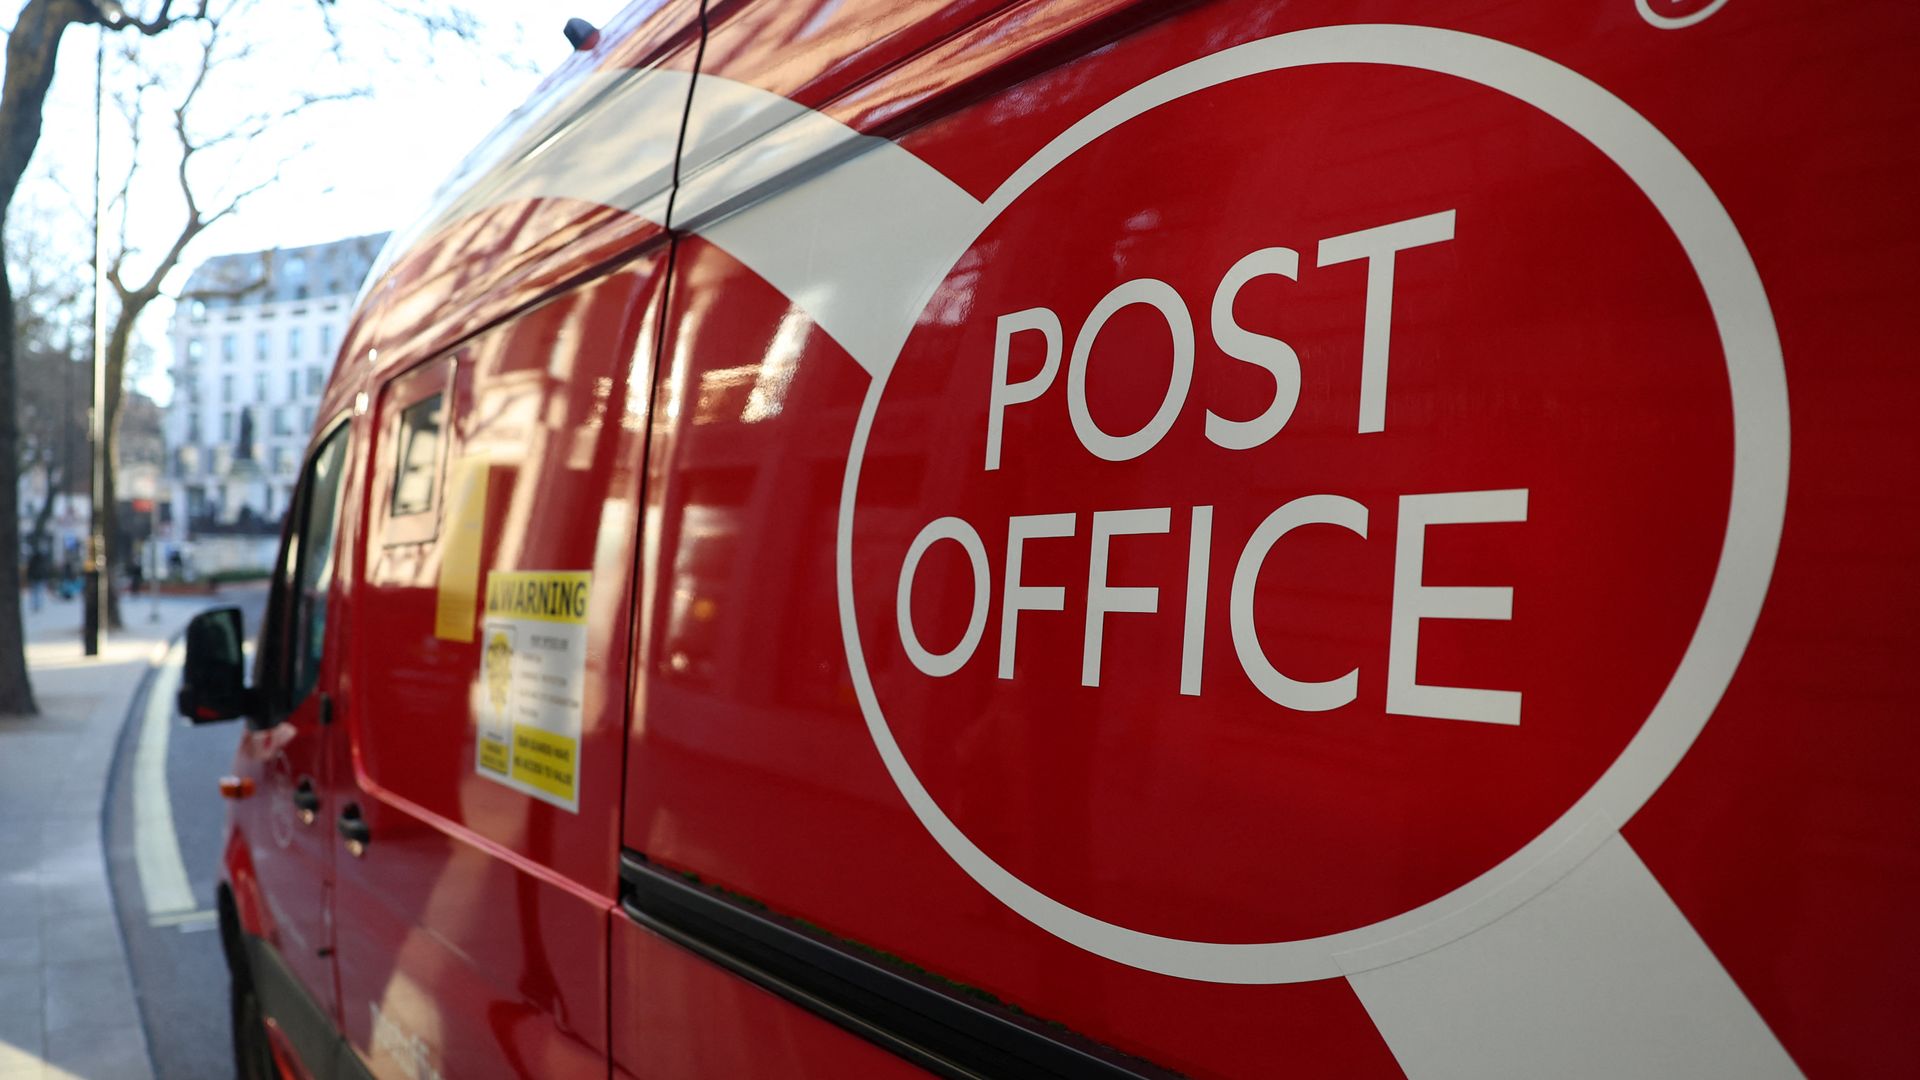 Post Office scandal extends 'greatly beyond Horizon' - victims' lawyer